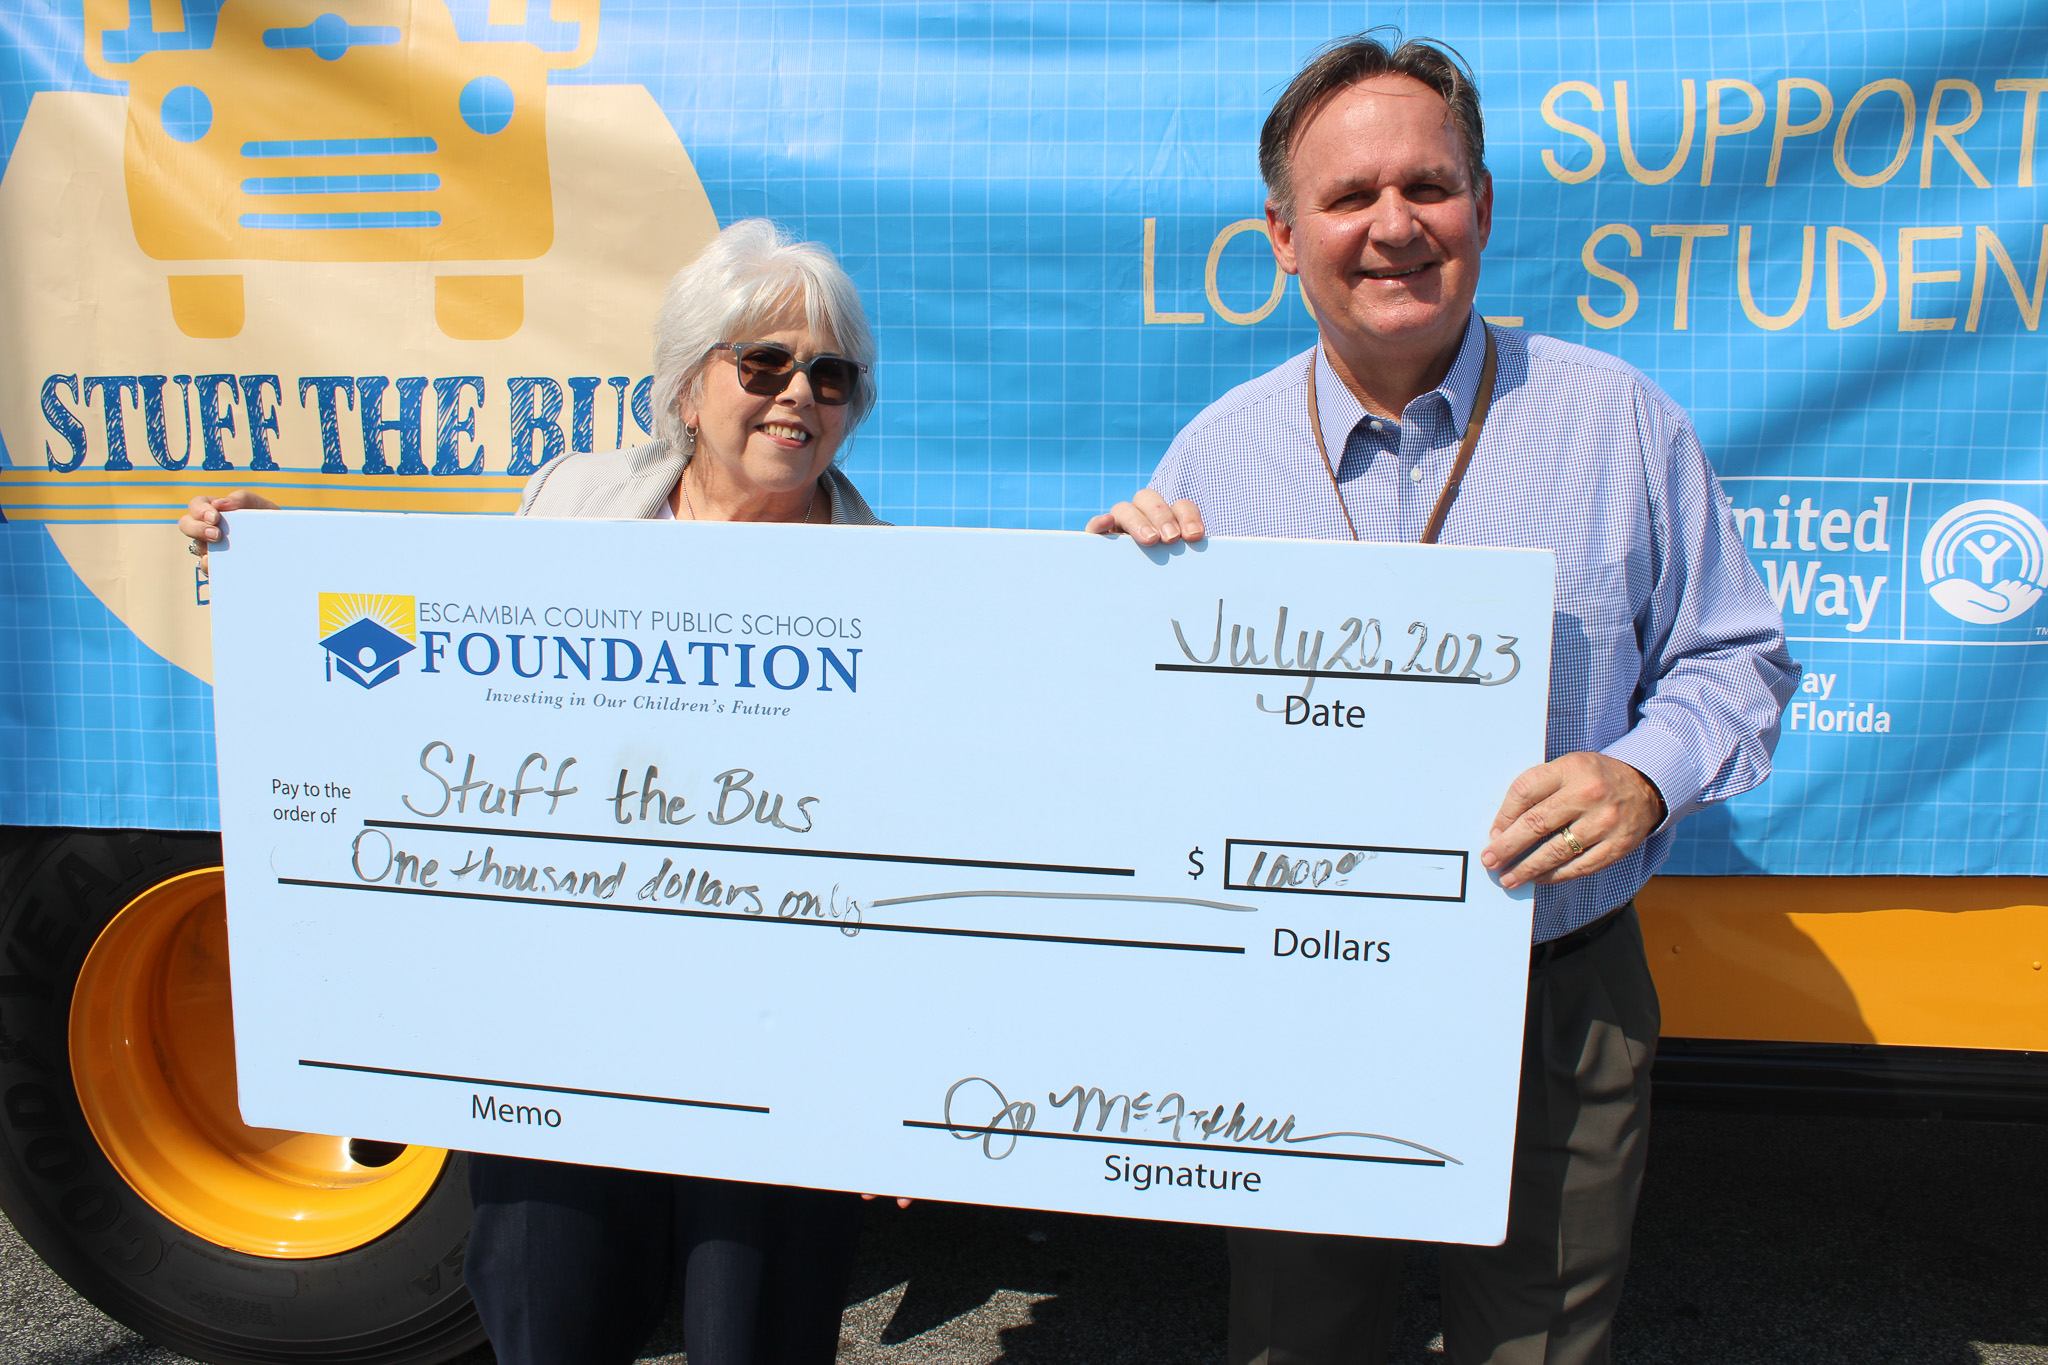 Escambia County Public School Foundation holding $1.000 check in front of Stuff the Bus Bus